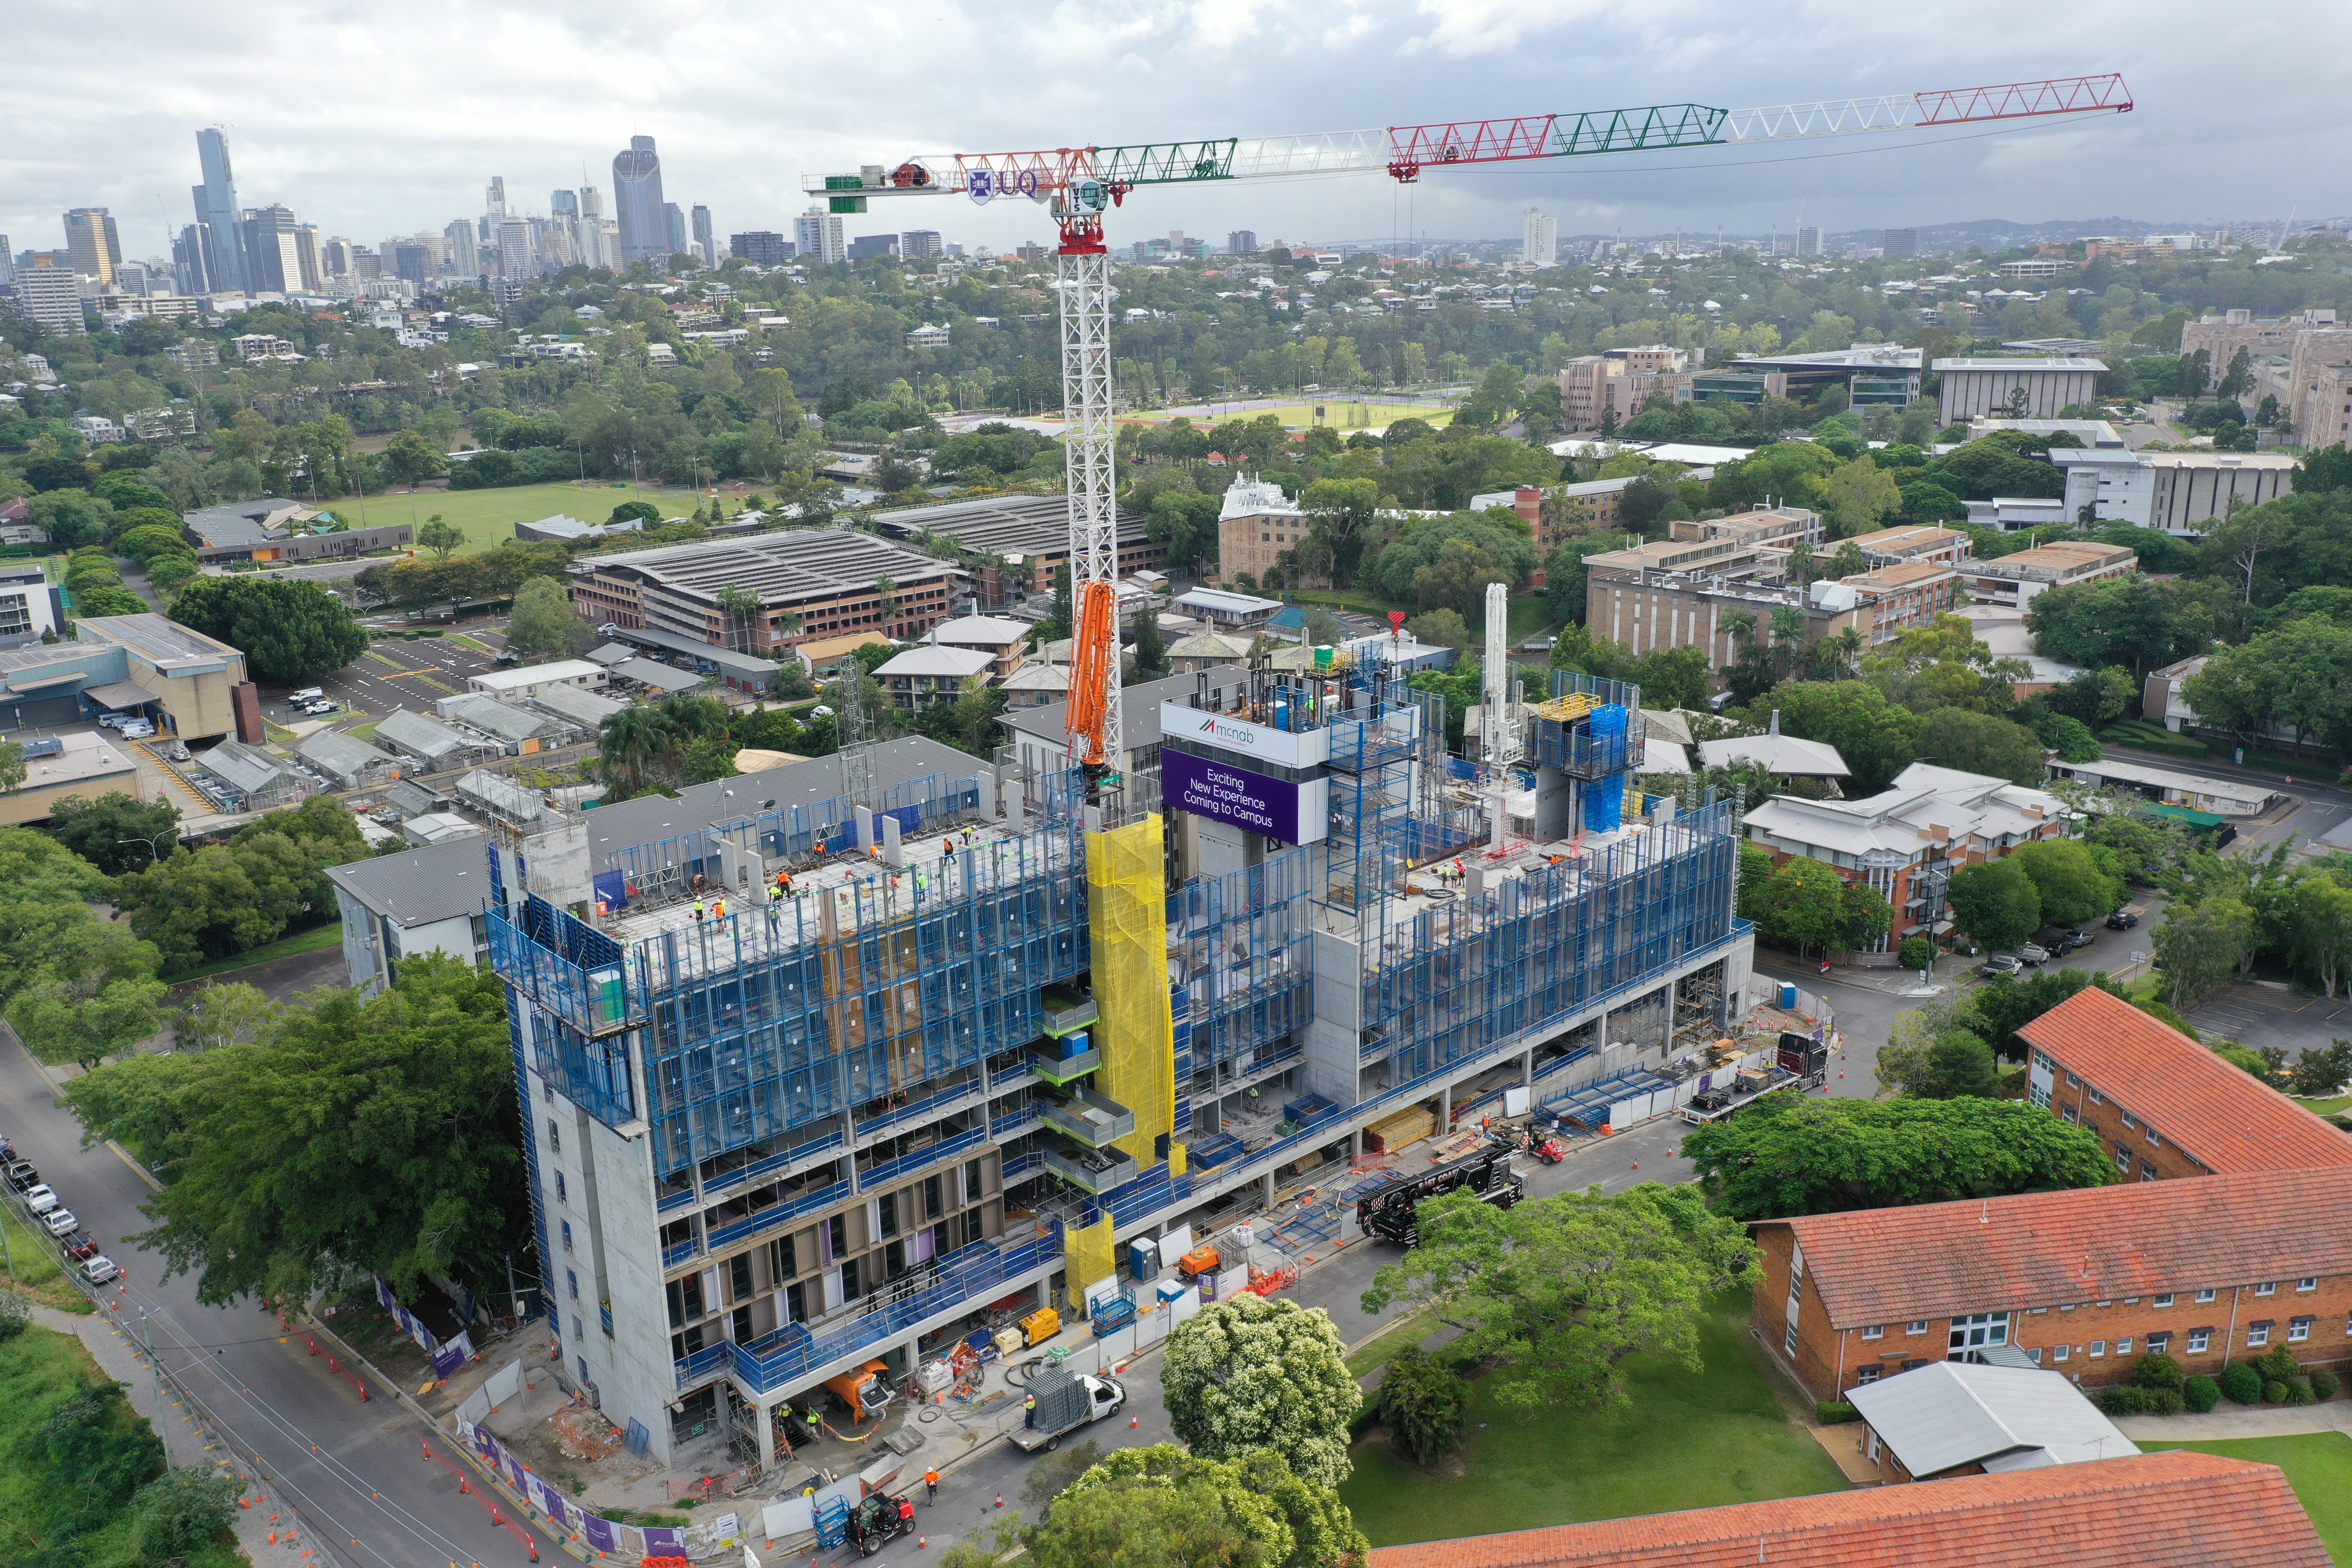 Student Residence construction site - Drone overhead - January 2021